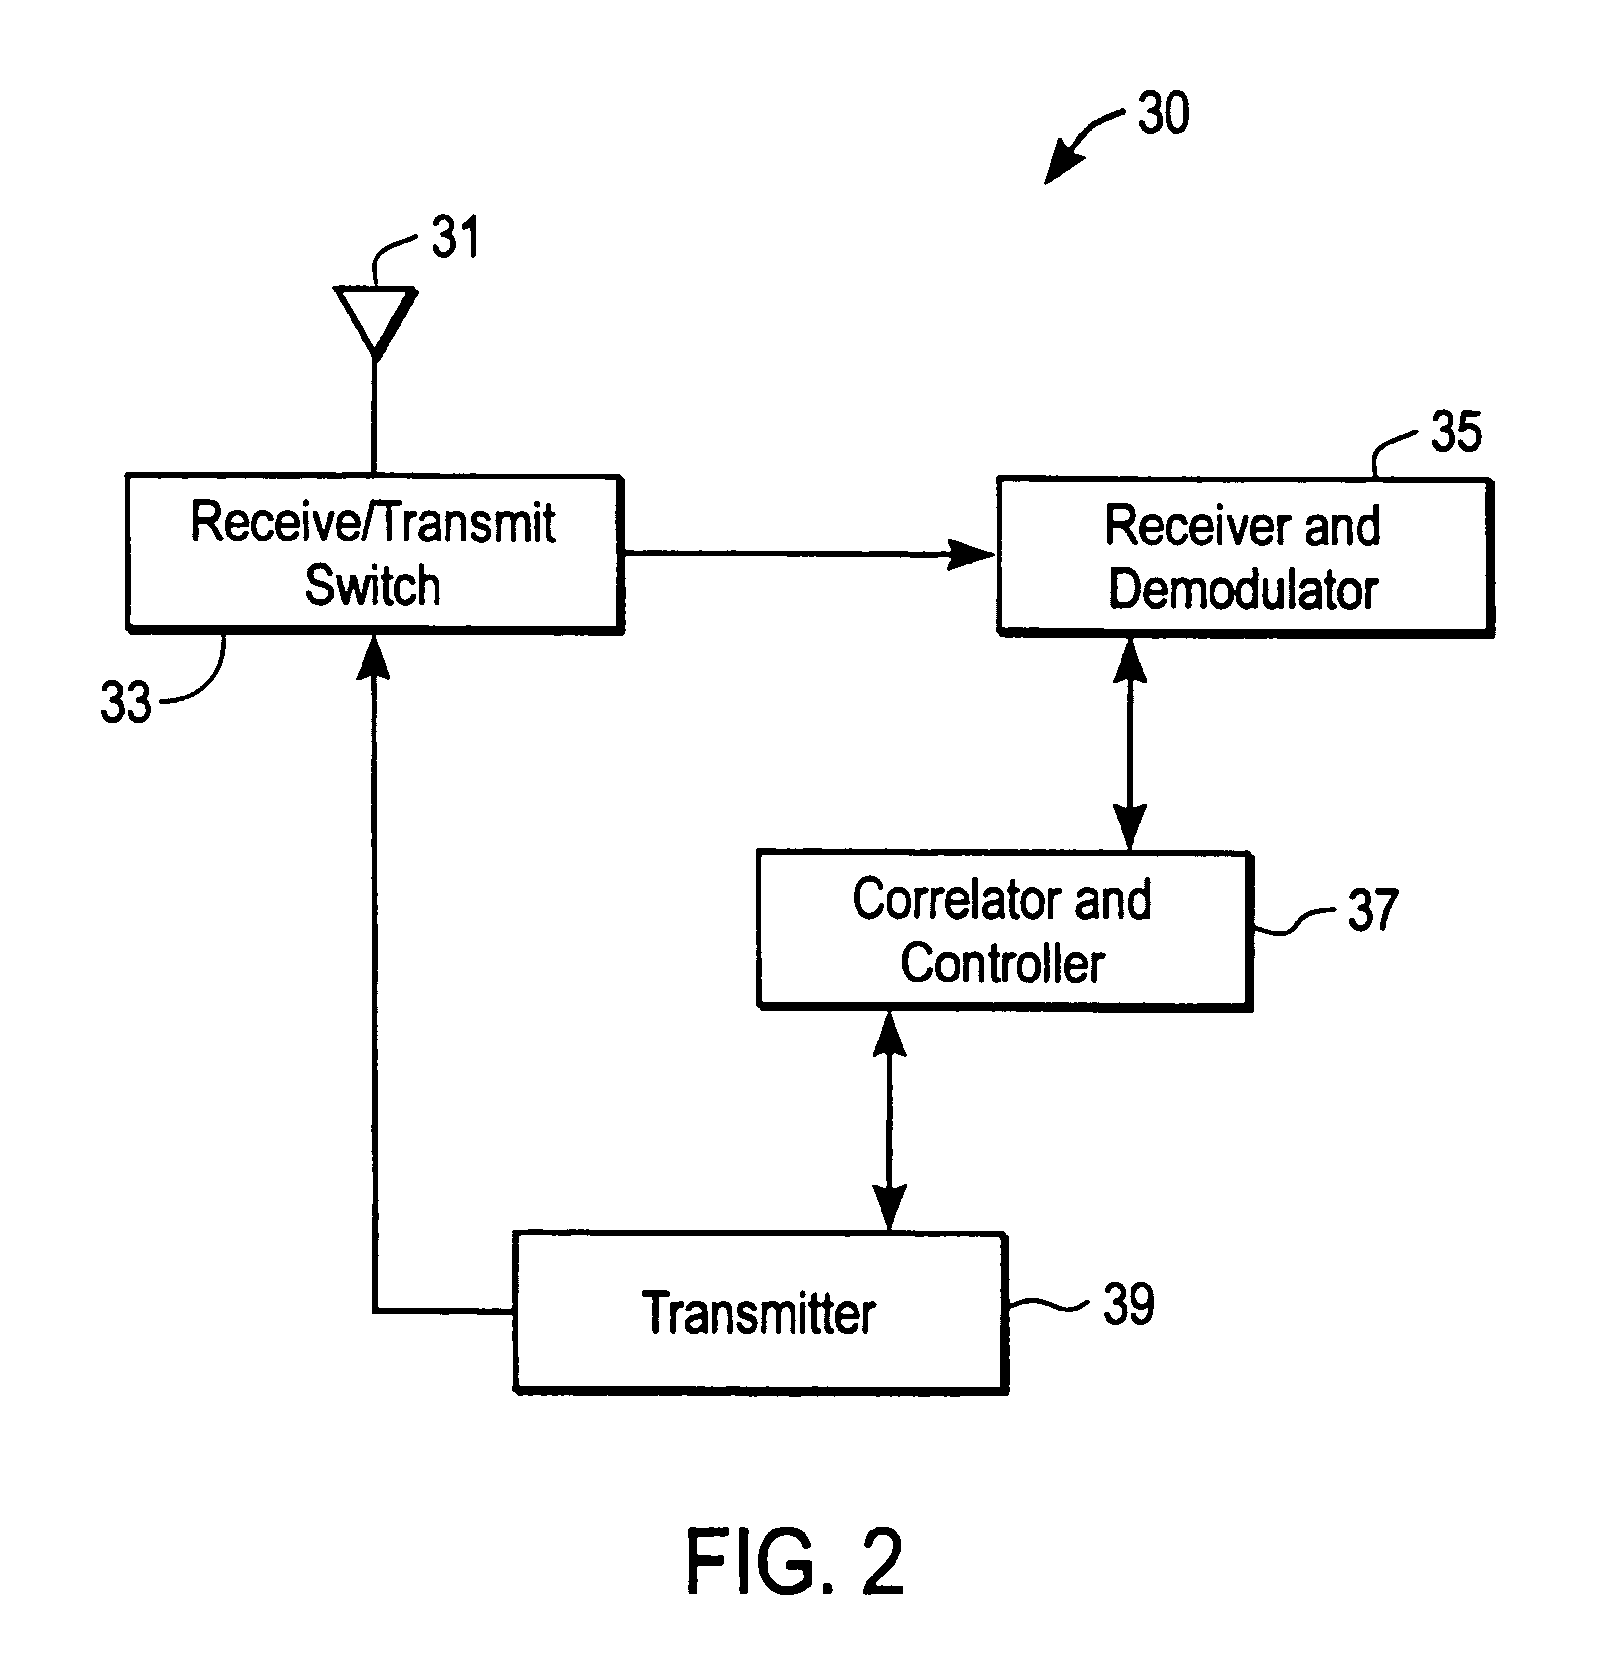 Methods and apparatuses to identify devices